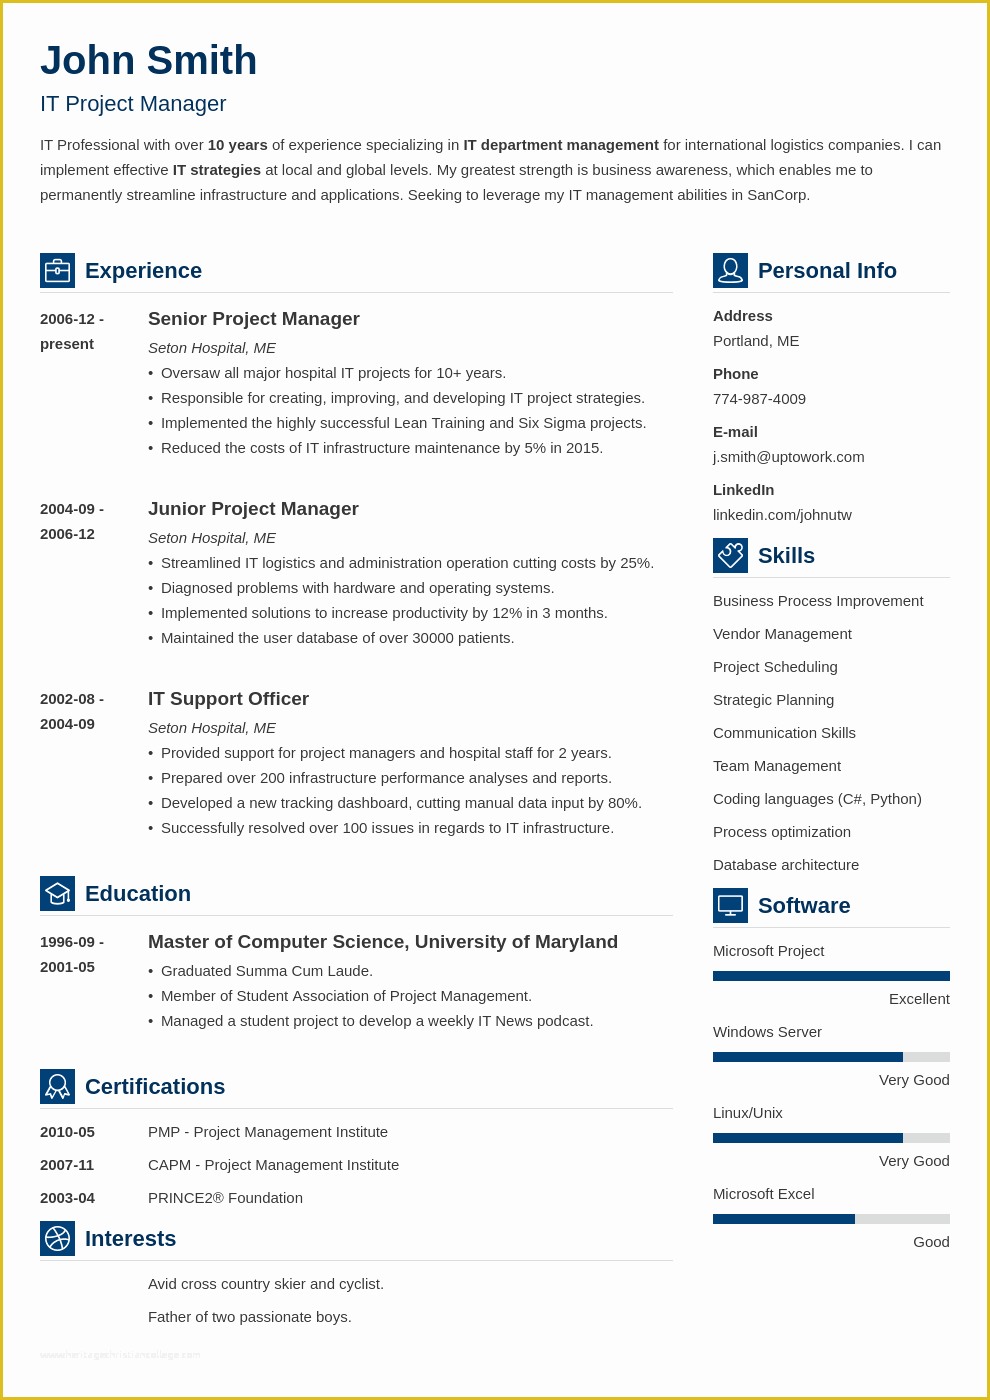 Free Business Resume Template 2018 Of 20 Cv Templates Create A Professional Cv & Download In 5